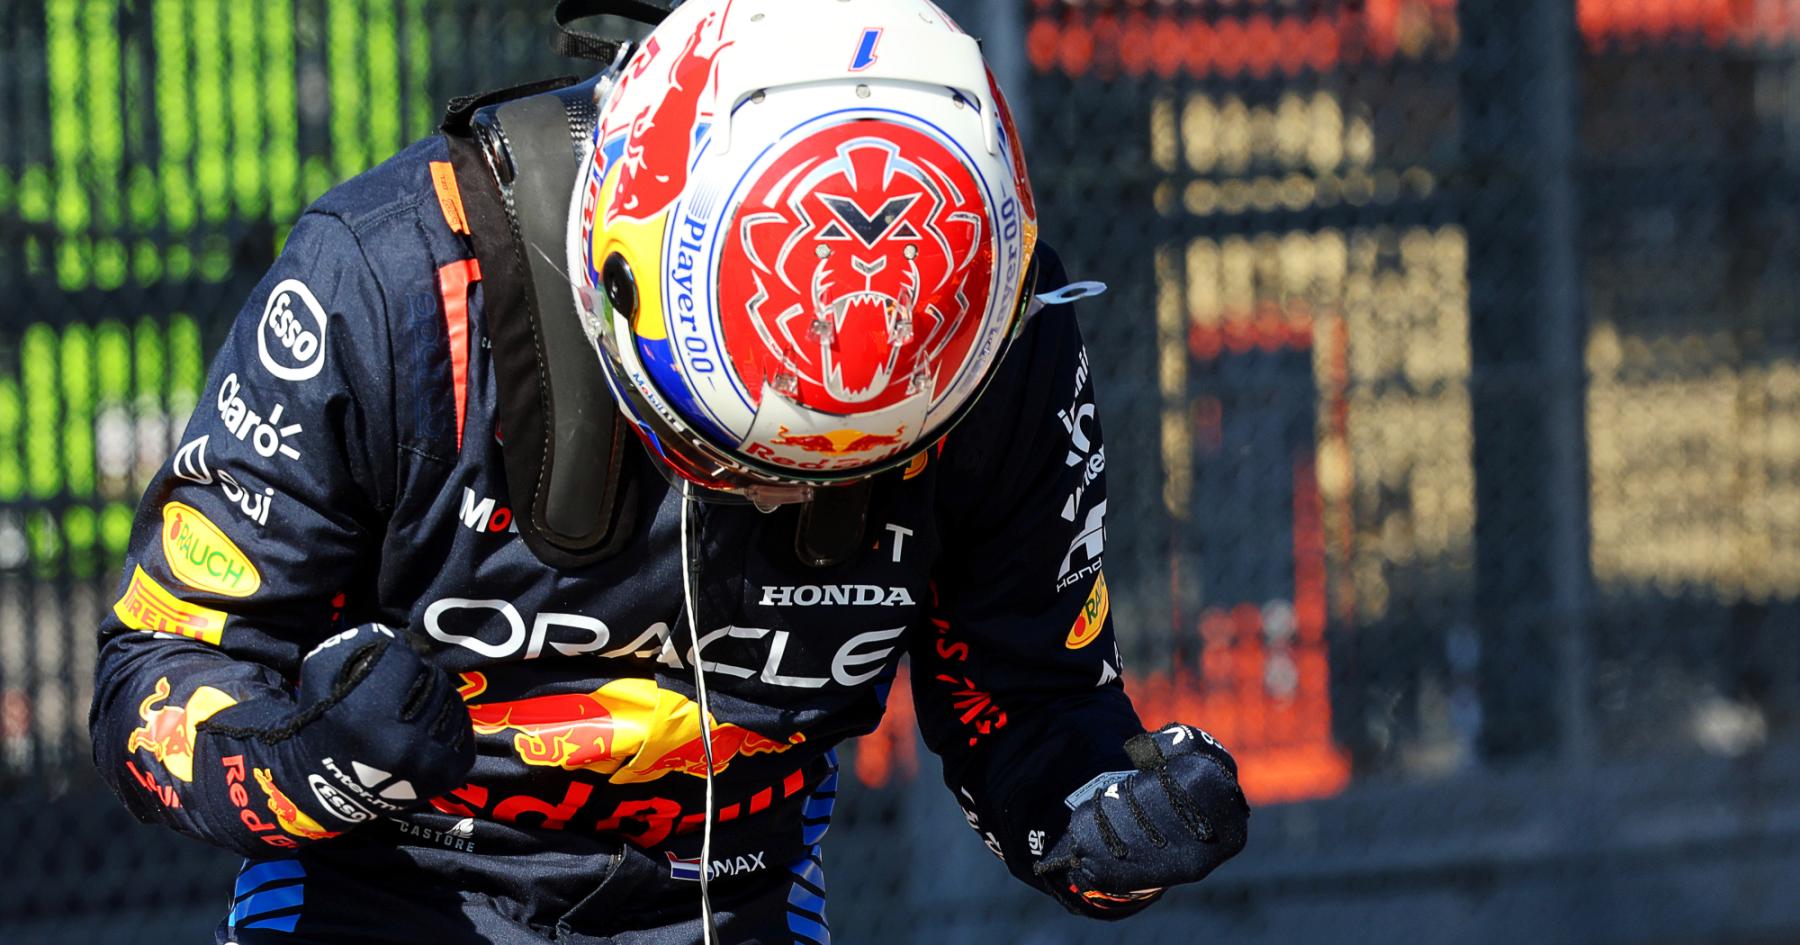 Verstappen Revs Up to Victory: Dominant Pole Position at Imola Leaves F1 World in Awe